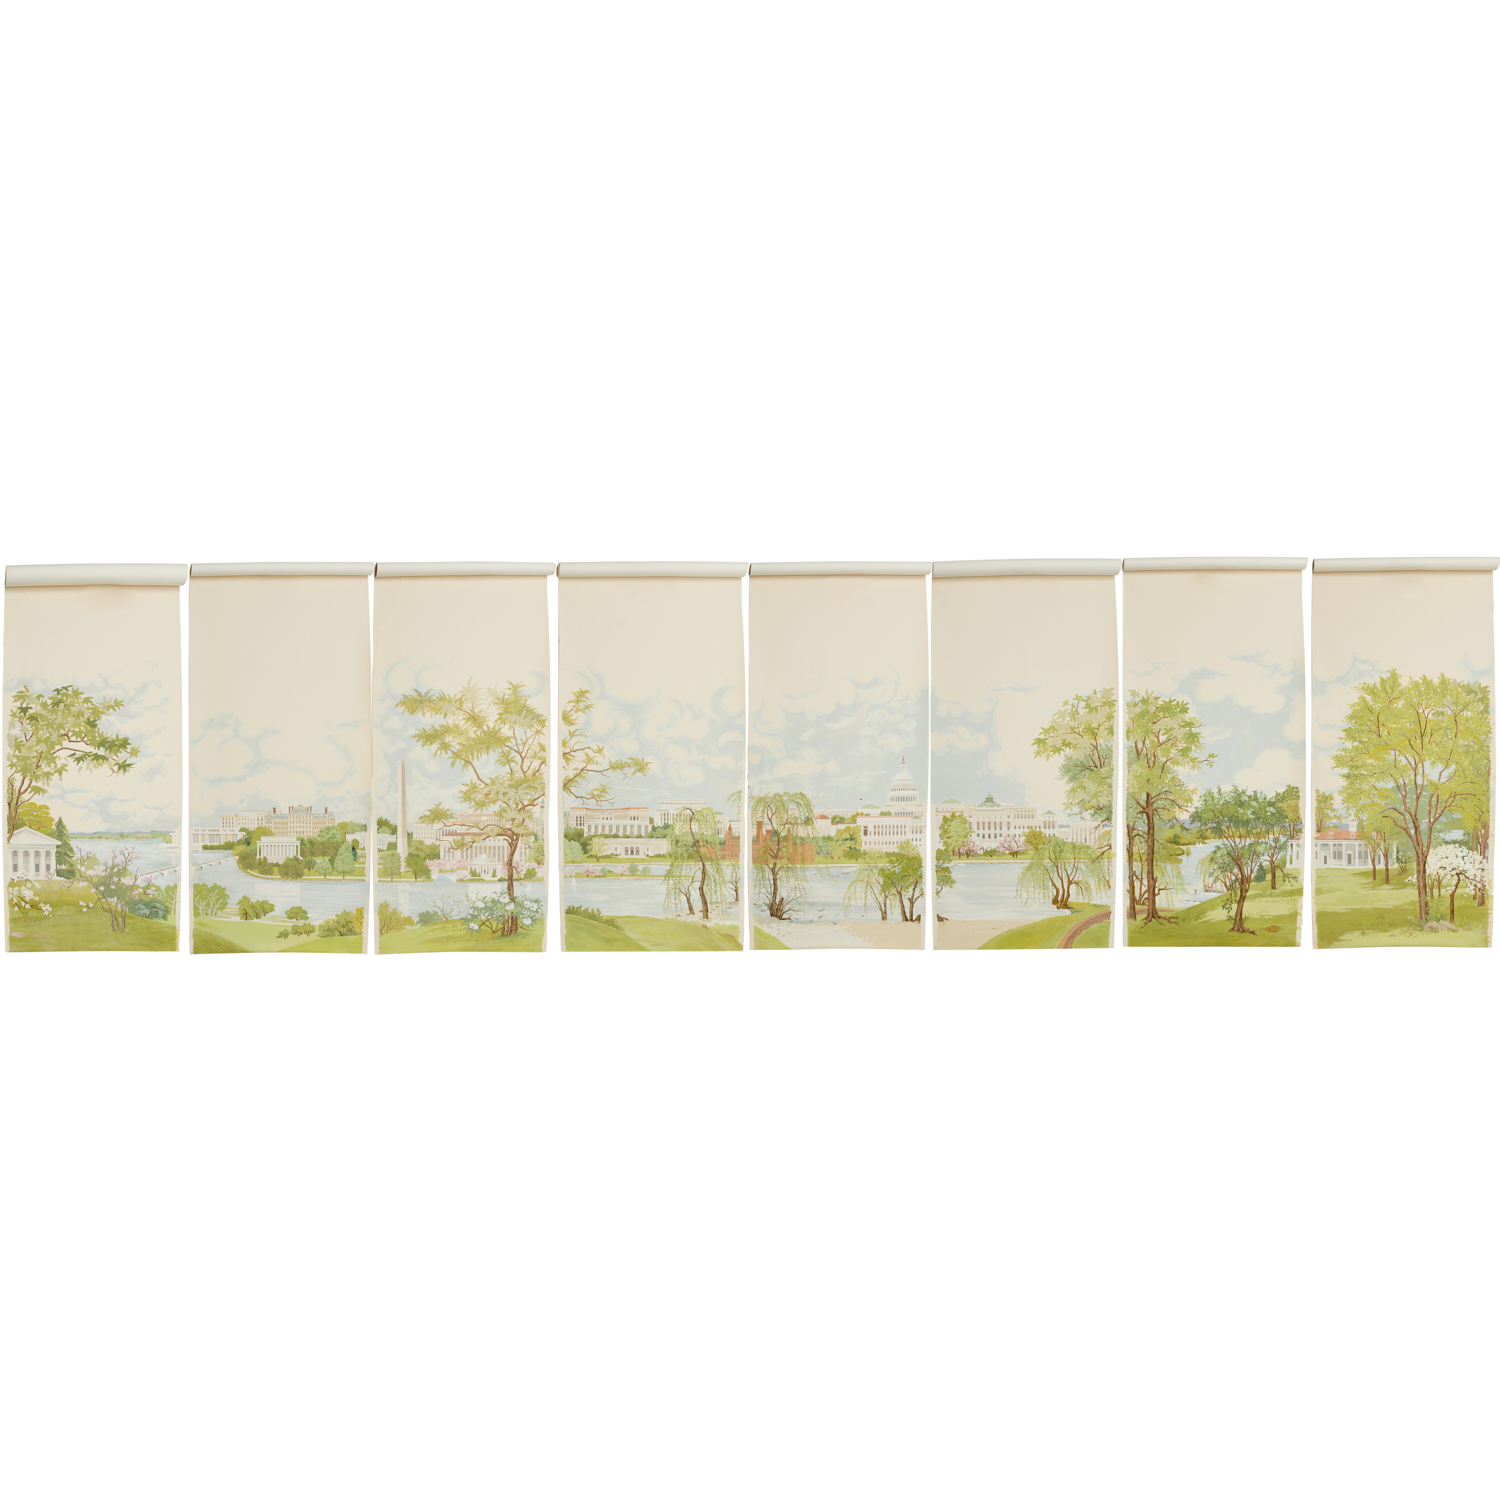 ZUBER STYLE HAND PAINTED WALLPAPER 360dfe